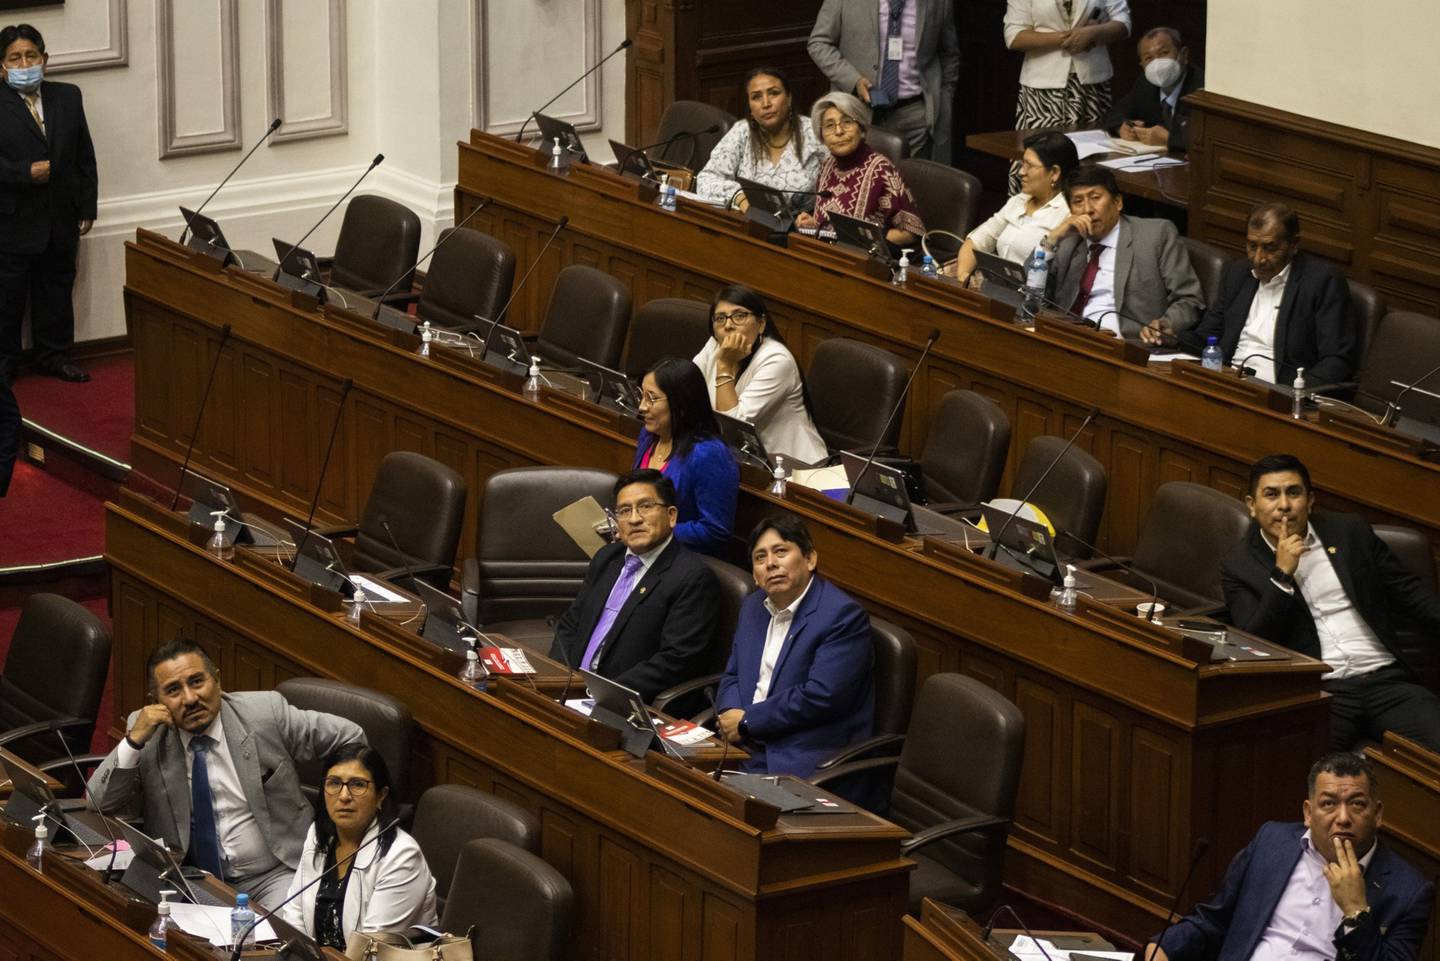 Peruvian lawmakers hold a vote to expedite elections at the Legislative Palace in Lima, Peru, on Monday, Jan. 30, 2023. In a series of tweets, the office of President Dina Boluarte urged lawmakers to prioritize "the interests of Peru" and put aside political interests after congress originally rejected a proposal to bring elections forward to as soon as this October. Photographer: Jimena Rodriguez Romani/Bloombergdfd